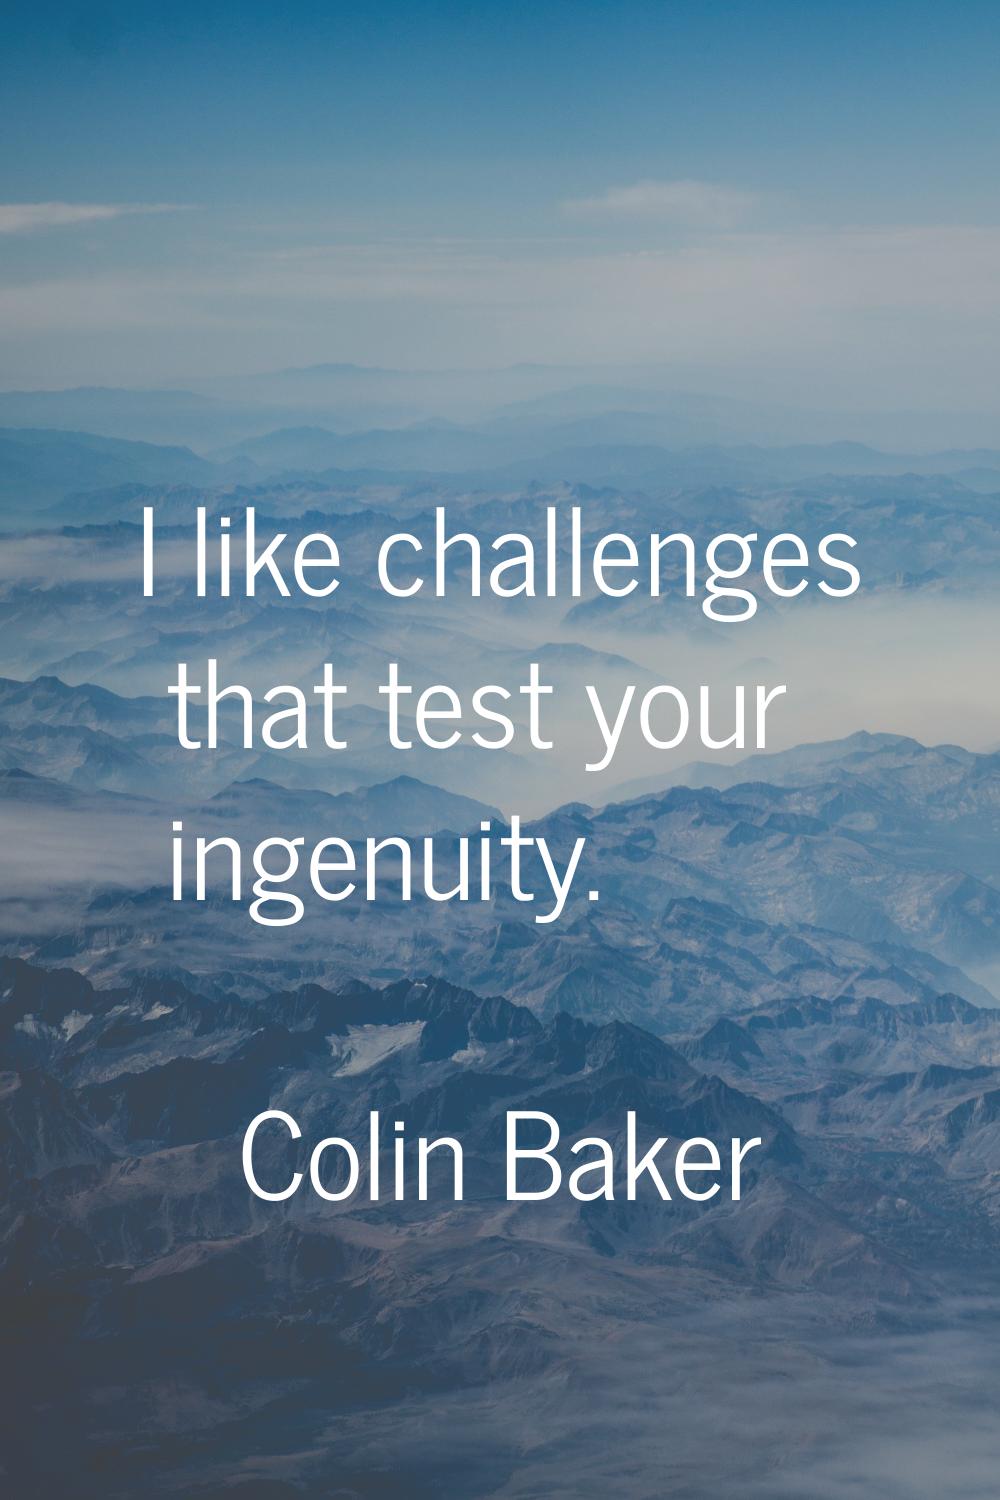 I like challenges that test your ingenuity.